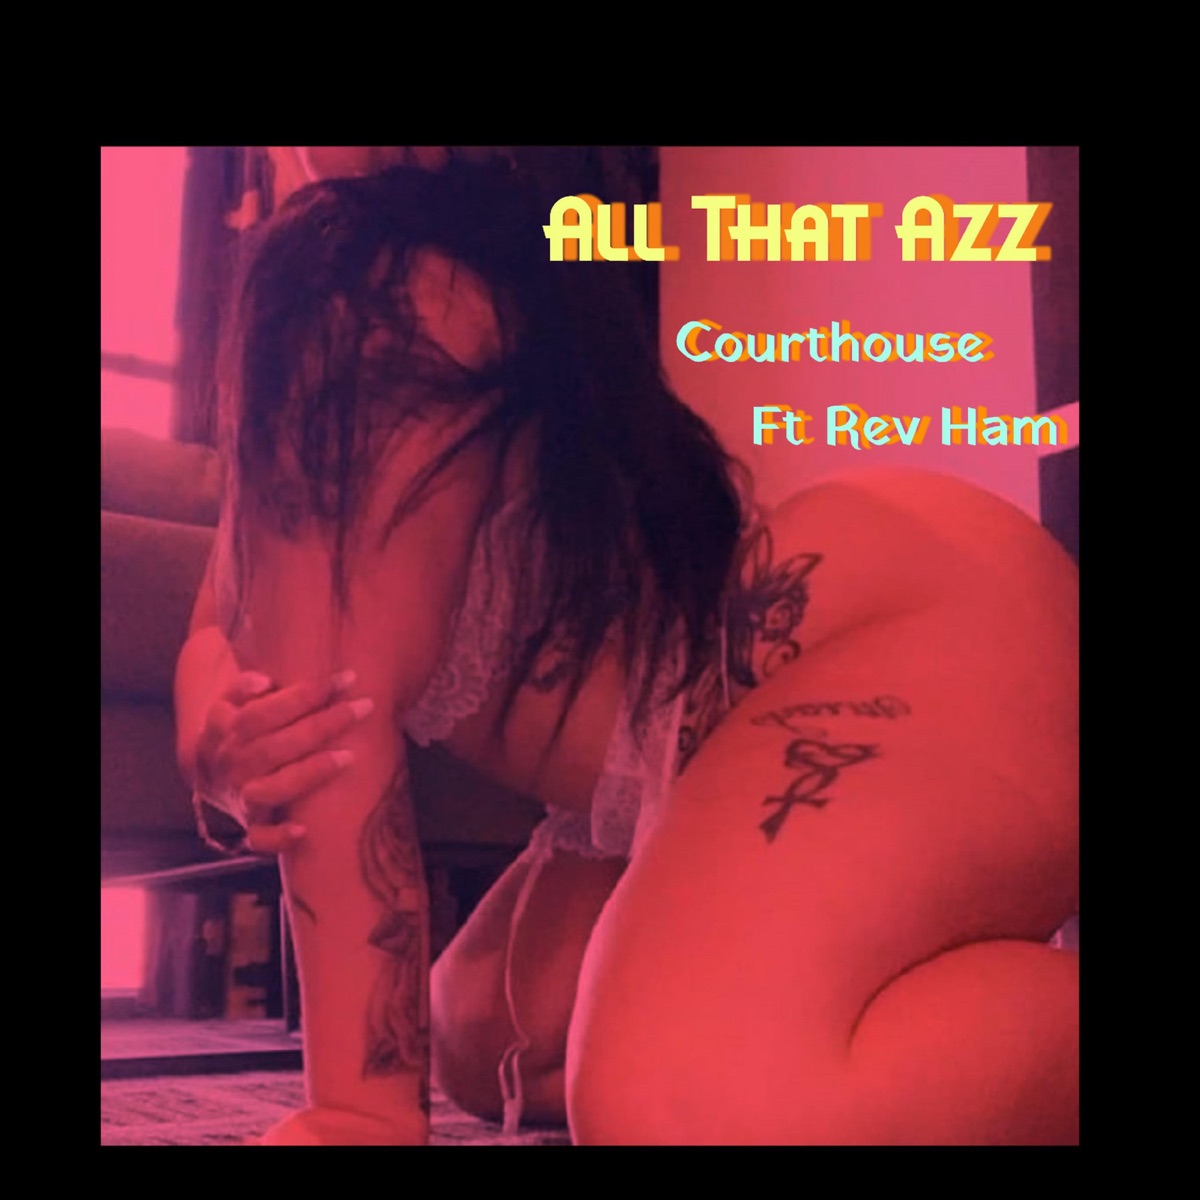 All That Azz Com mature nudes